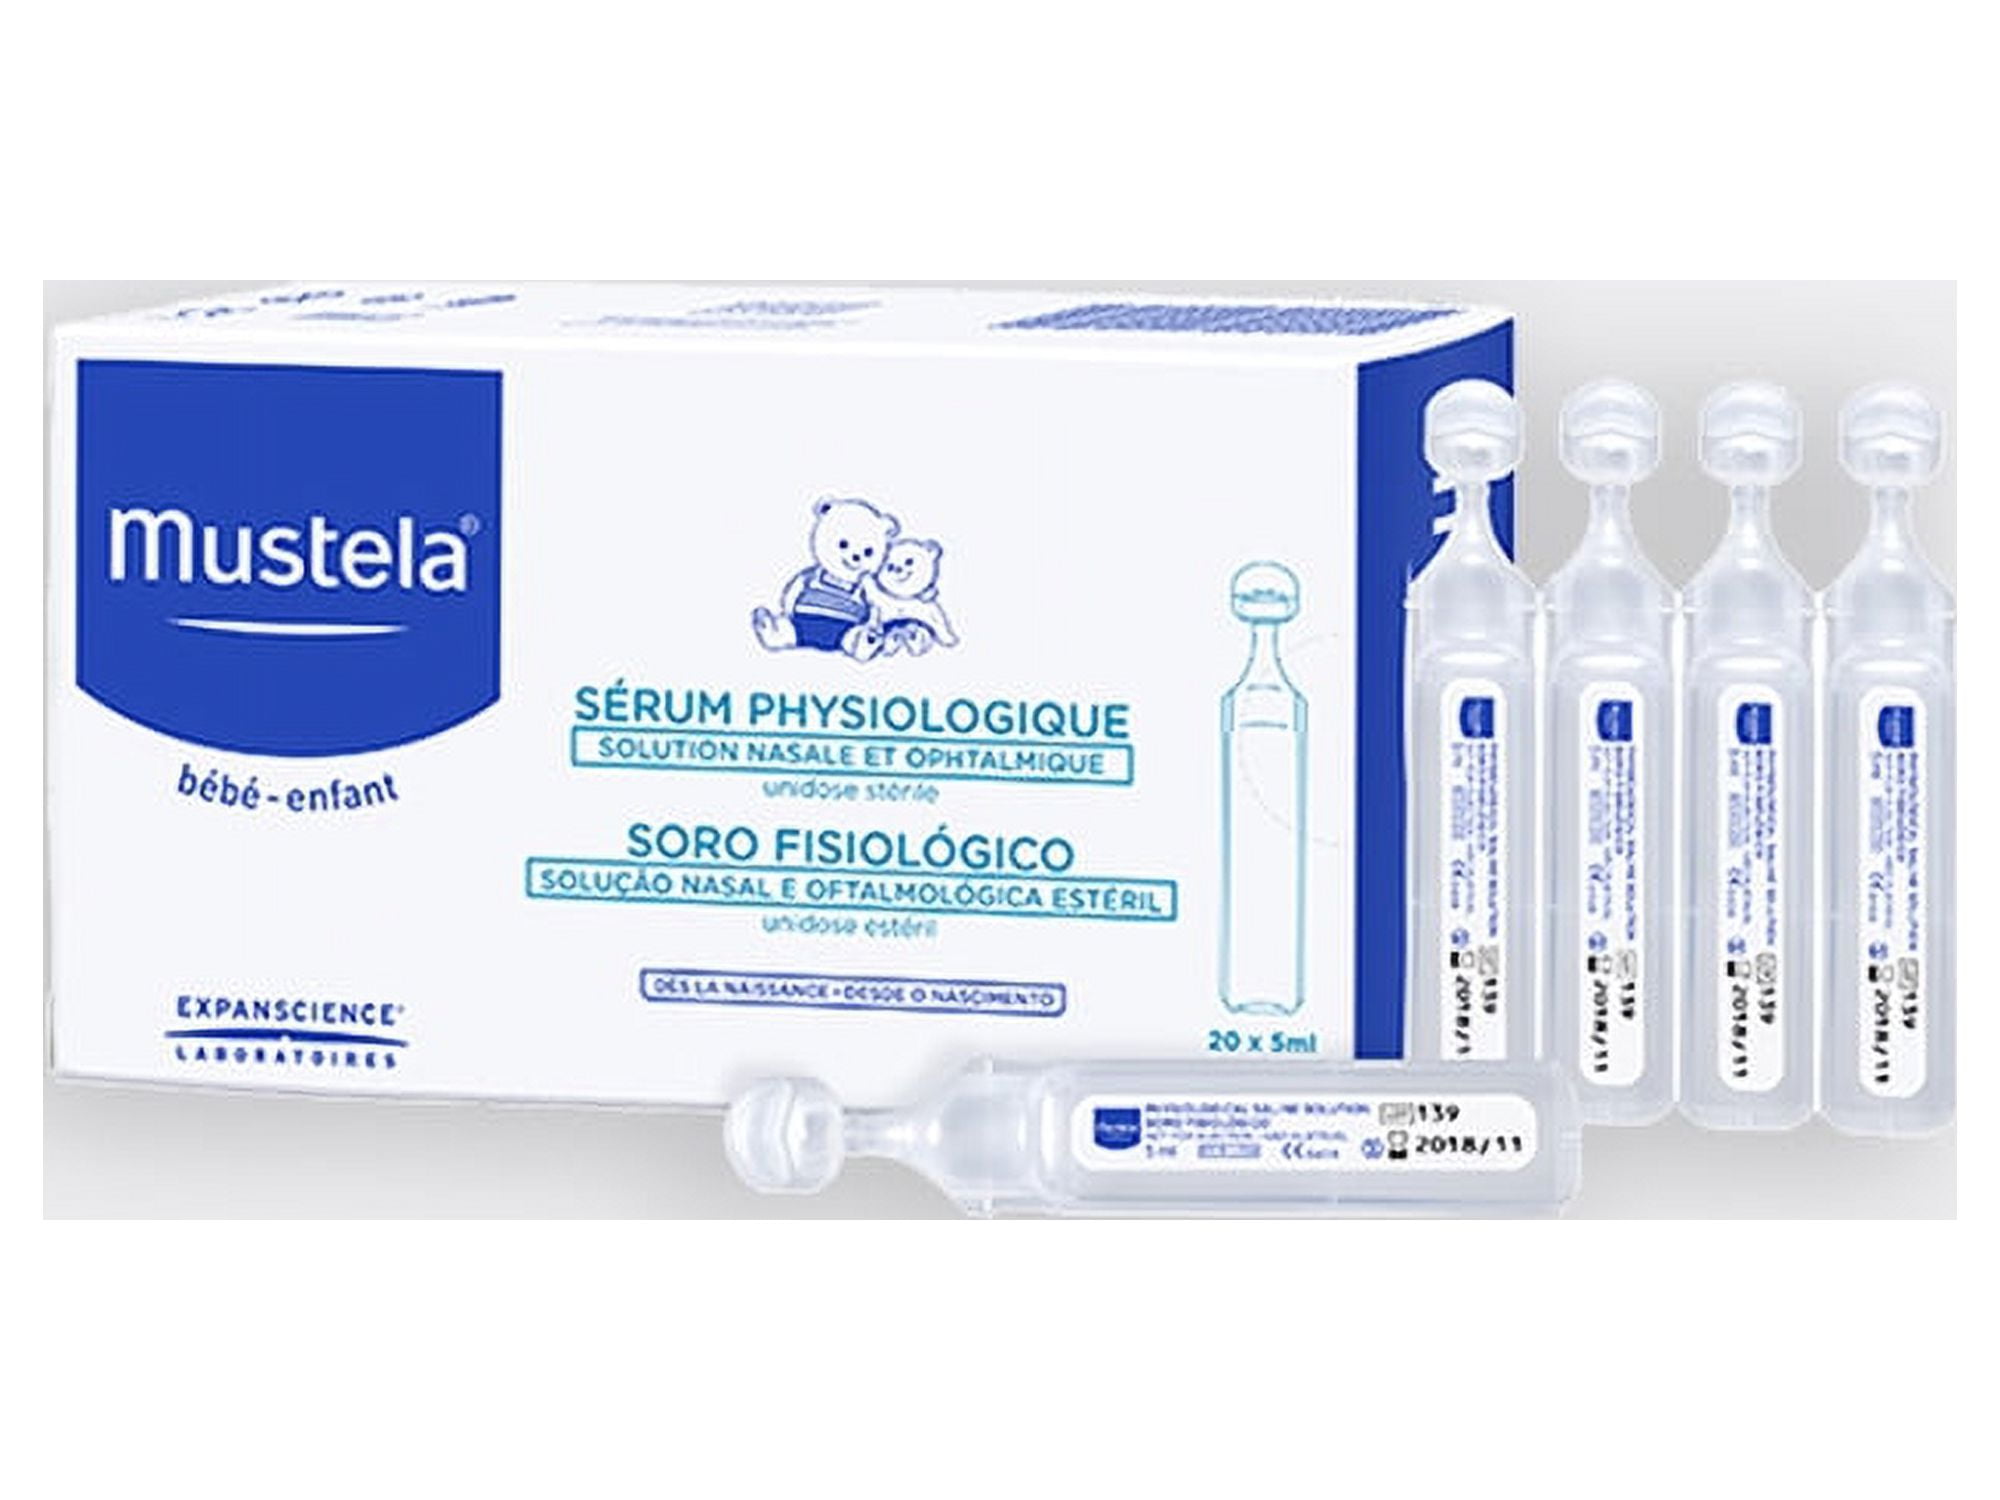 Mustela Serum Physiologique Baby Nose and Eye Cleaning 20 x 5 ml Vial 